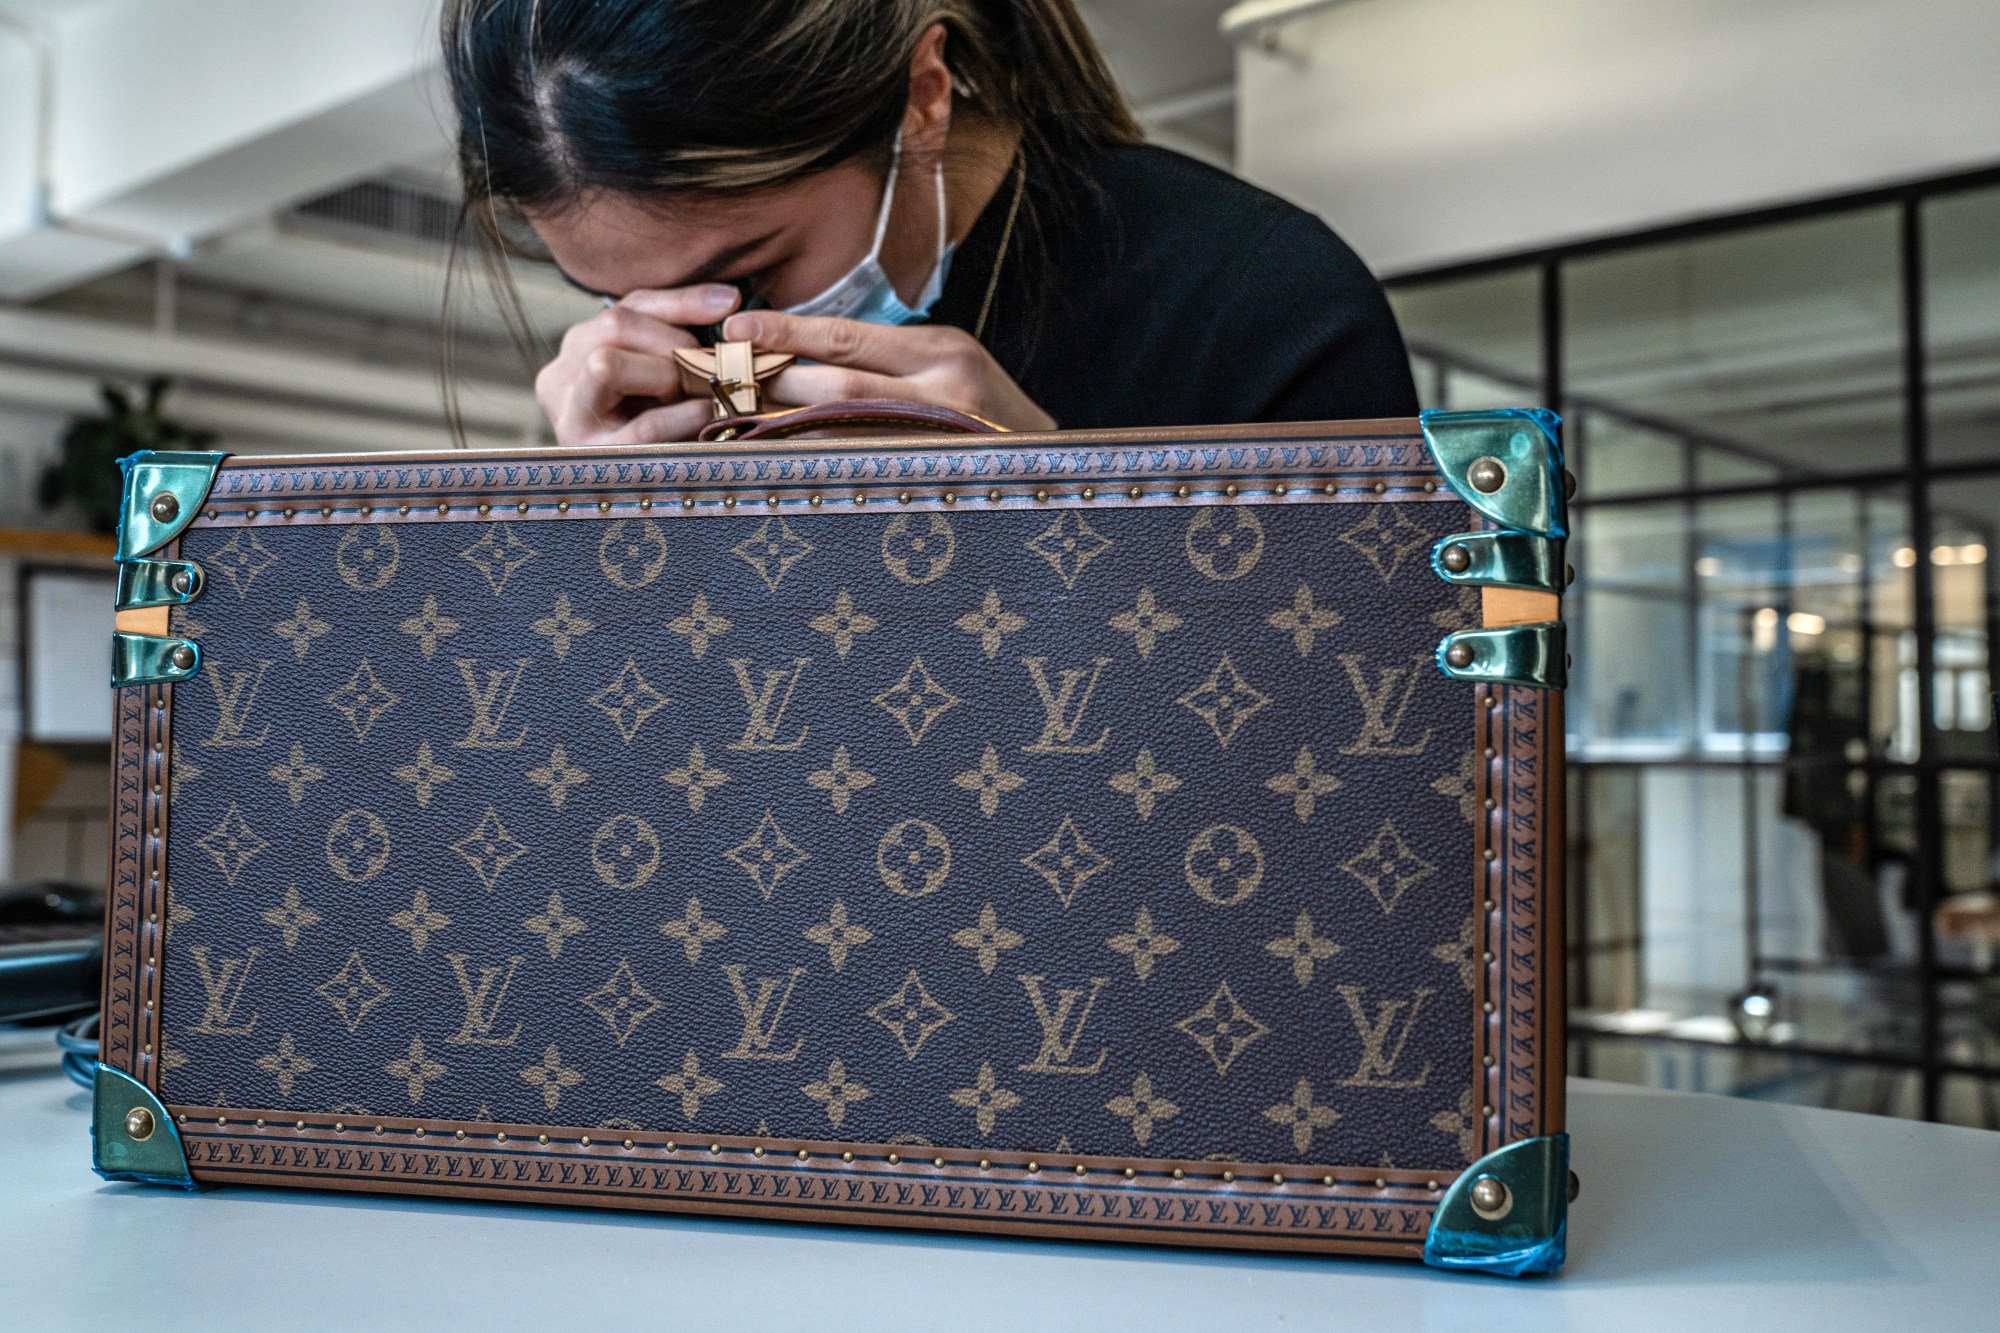 Why Louis Vuitton is Considered a Brand for Secretaries by Many Wealthy  Chinese